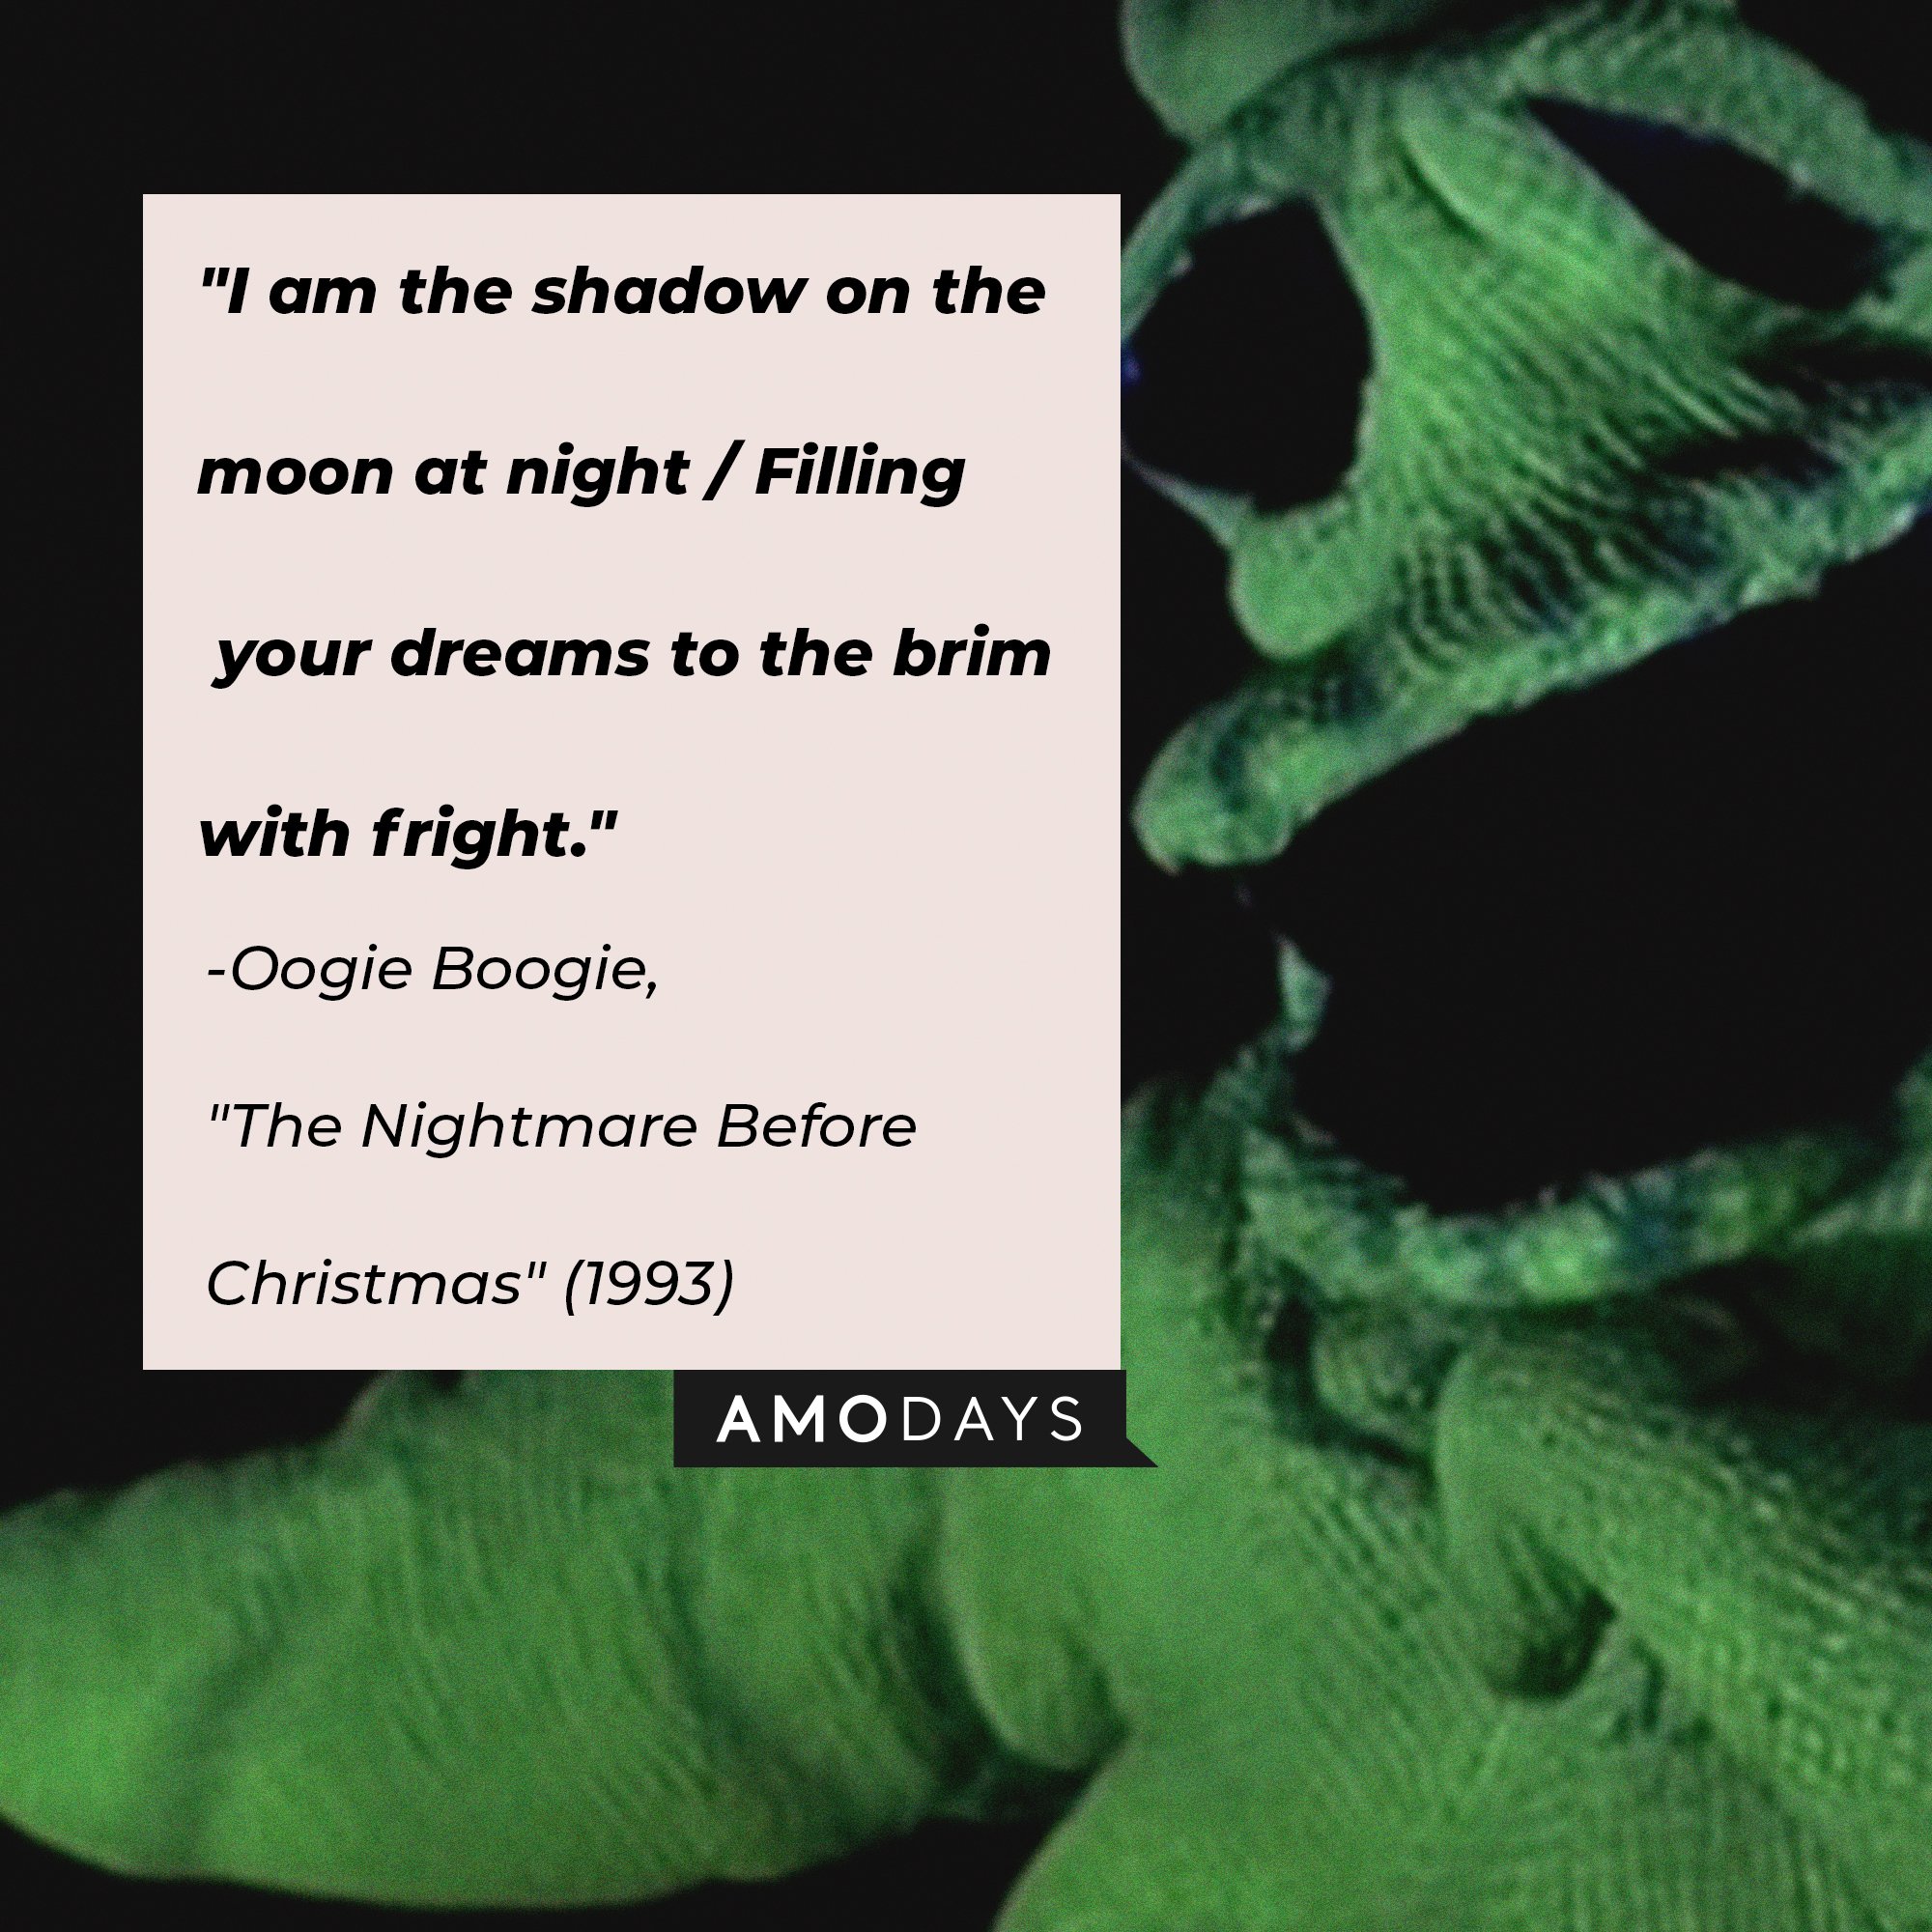   Oogie Boogie’s quote from "The Nightmare Before Christmas":  "I am the shadow on the moon at night l Filling your dreams to the brim with fright."  | Image: AmoDays